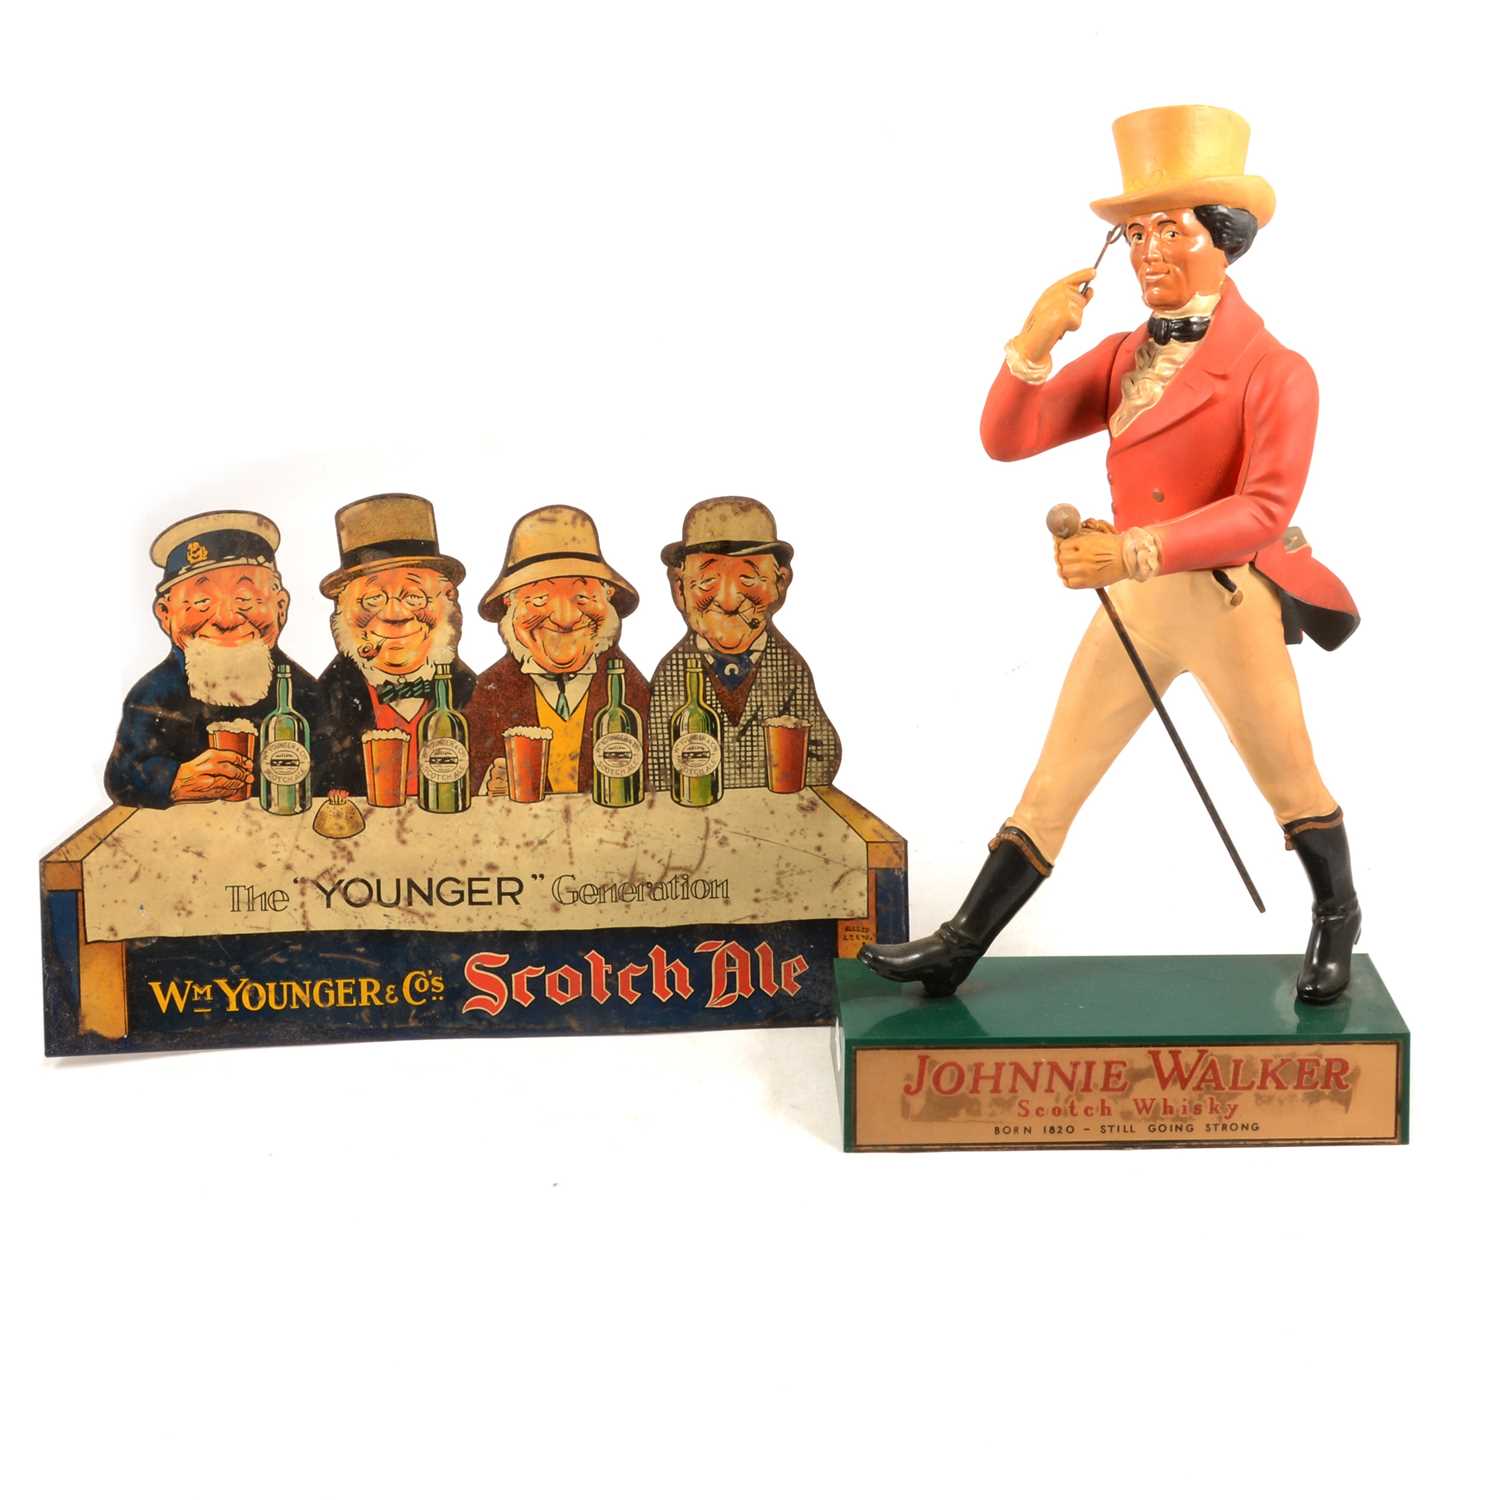 Lot 62 - Johnnie Walker Scotch Whisky advertising counter-top figure, and a Younger & Co tin sign